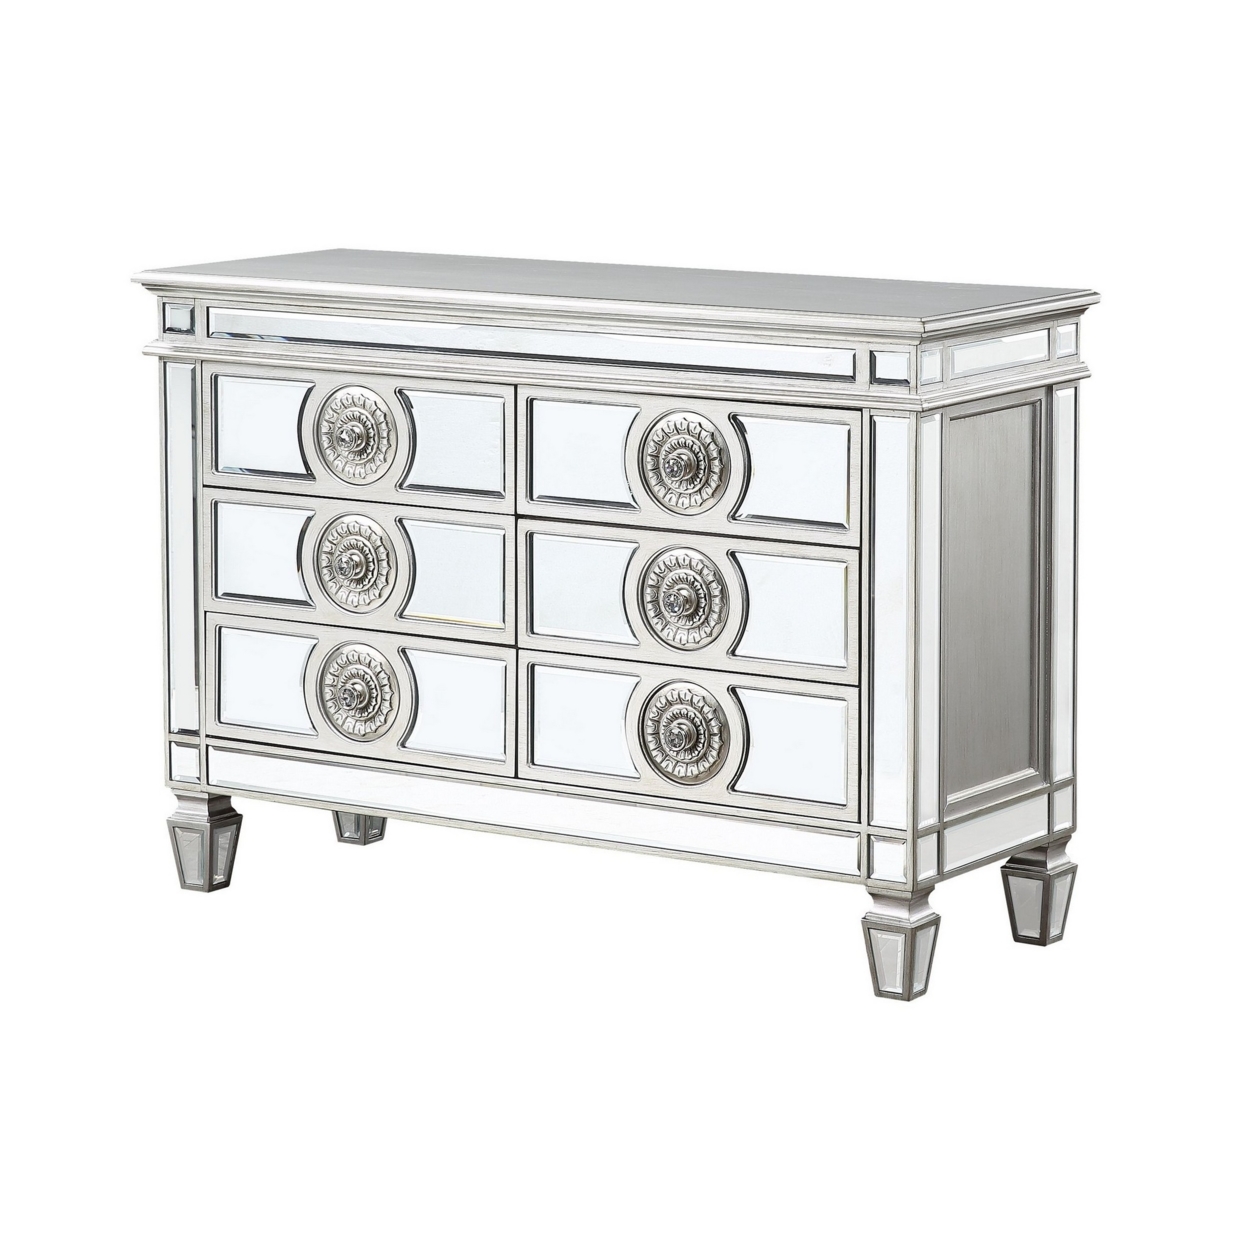 Server With 6 Mirrored Drawers And Medallion Front, Silver- Saltoro Sherpi